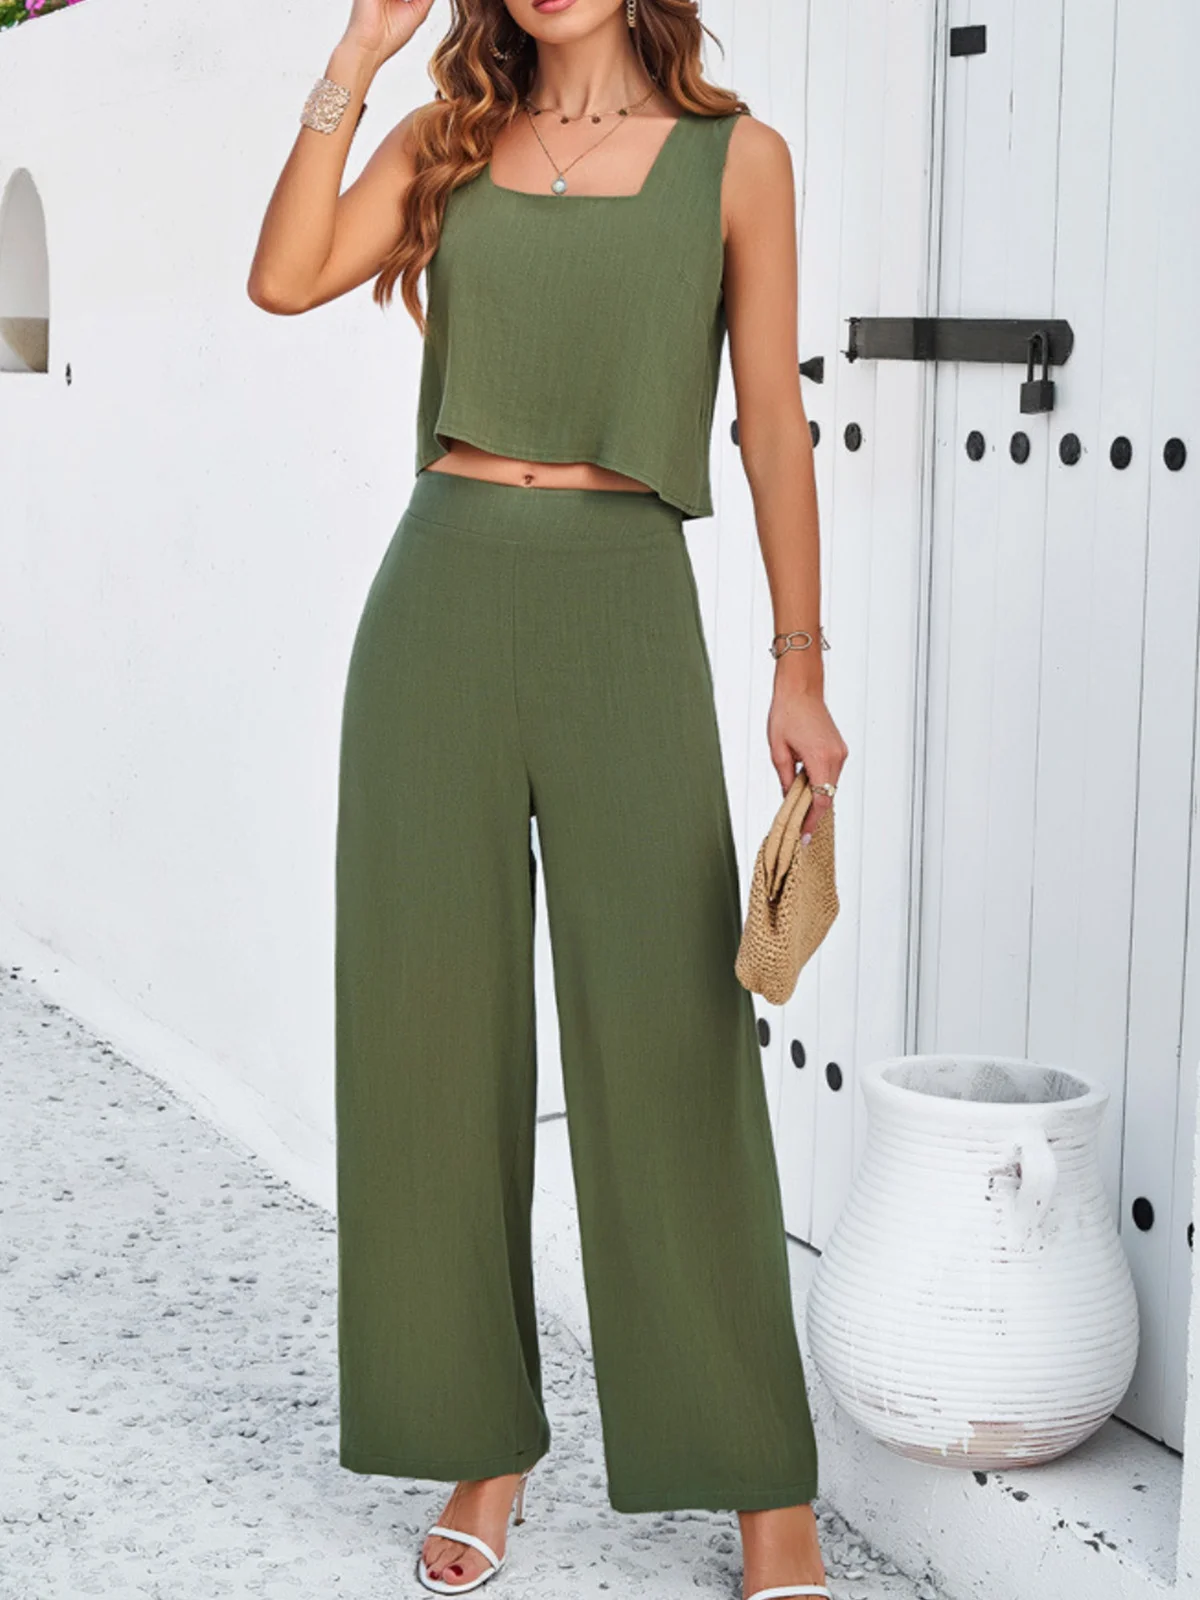 Women Plain Square Neck Sleeveless Comfy Casual Top With Skirt Two-Piece Set